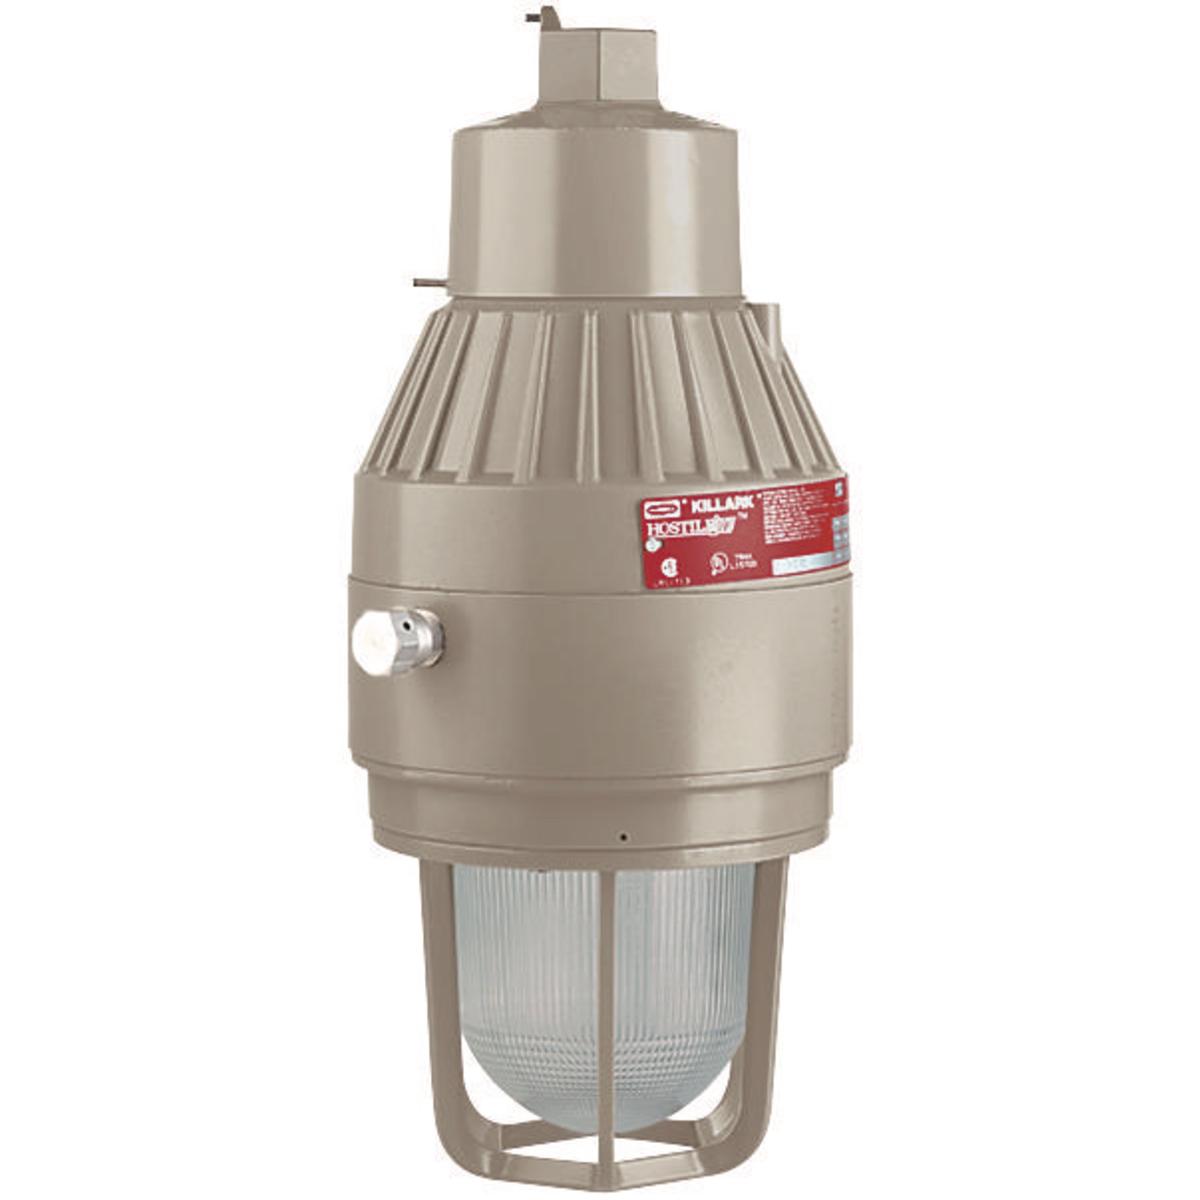 Hubbell EEQ2626E10A2G 26W Fluorescent 120/277V 3/4"Pendant with Globe  ; Quad-Pin long-life triple-tube compact ; Fluorescent lamps included ; Choice of Pendant, Ceiling, Wall or Stanchion mount ; Factory Sealed - No external seal required ; Corrosion resistant-Copper-free alu